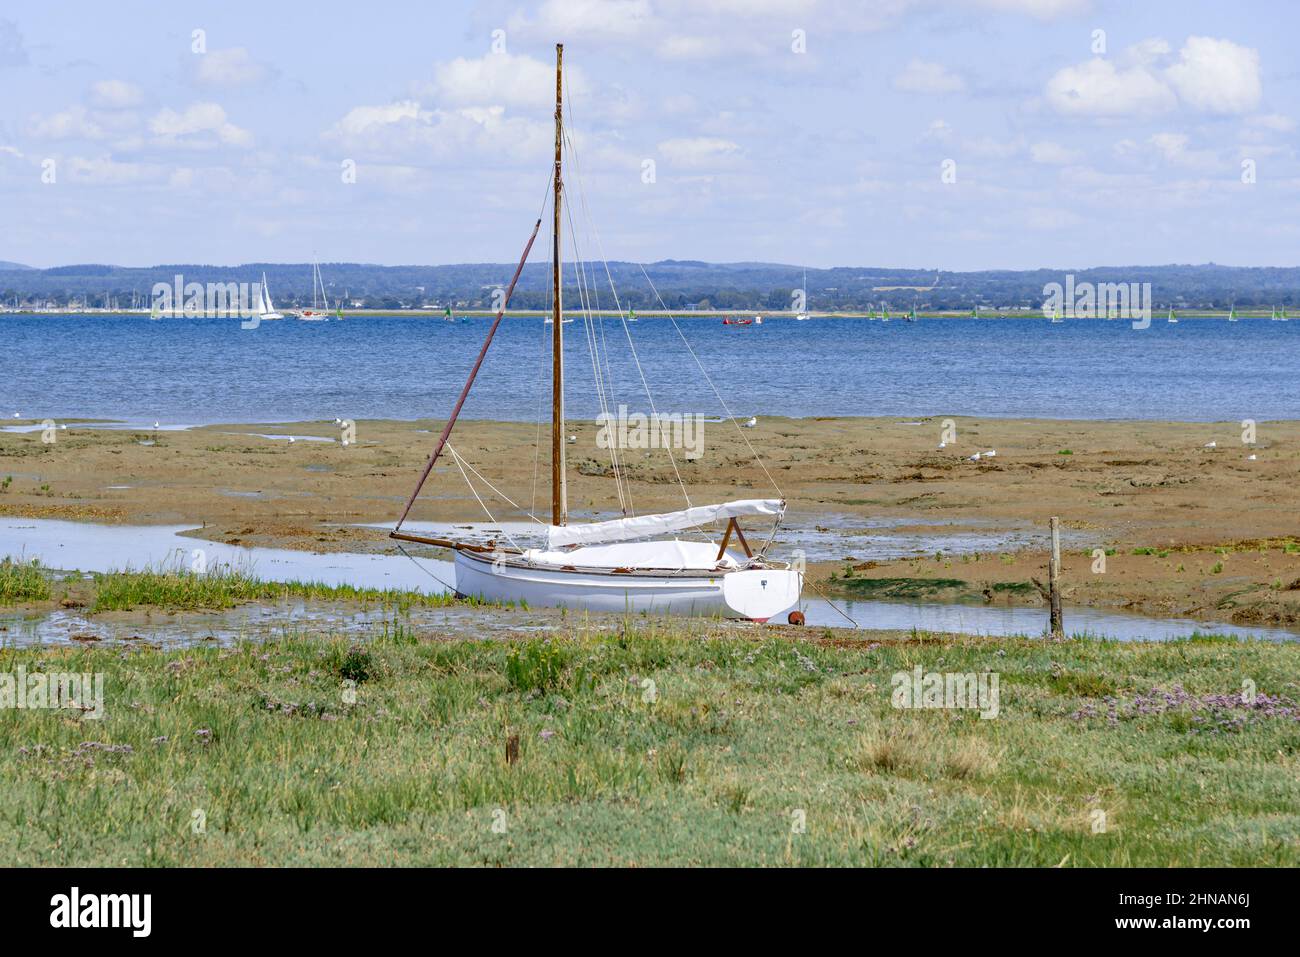 Picturesque scene of boat moored at low tide in Chichester Harbour with Hayling Island in the far distance near Chichester, West Sussex, England, UK Stock Photo